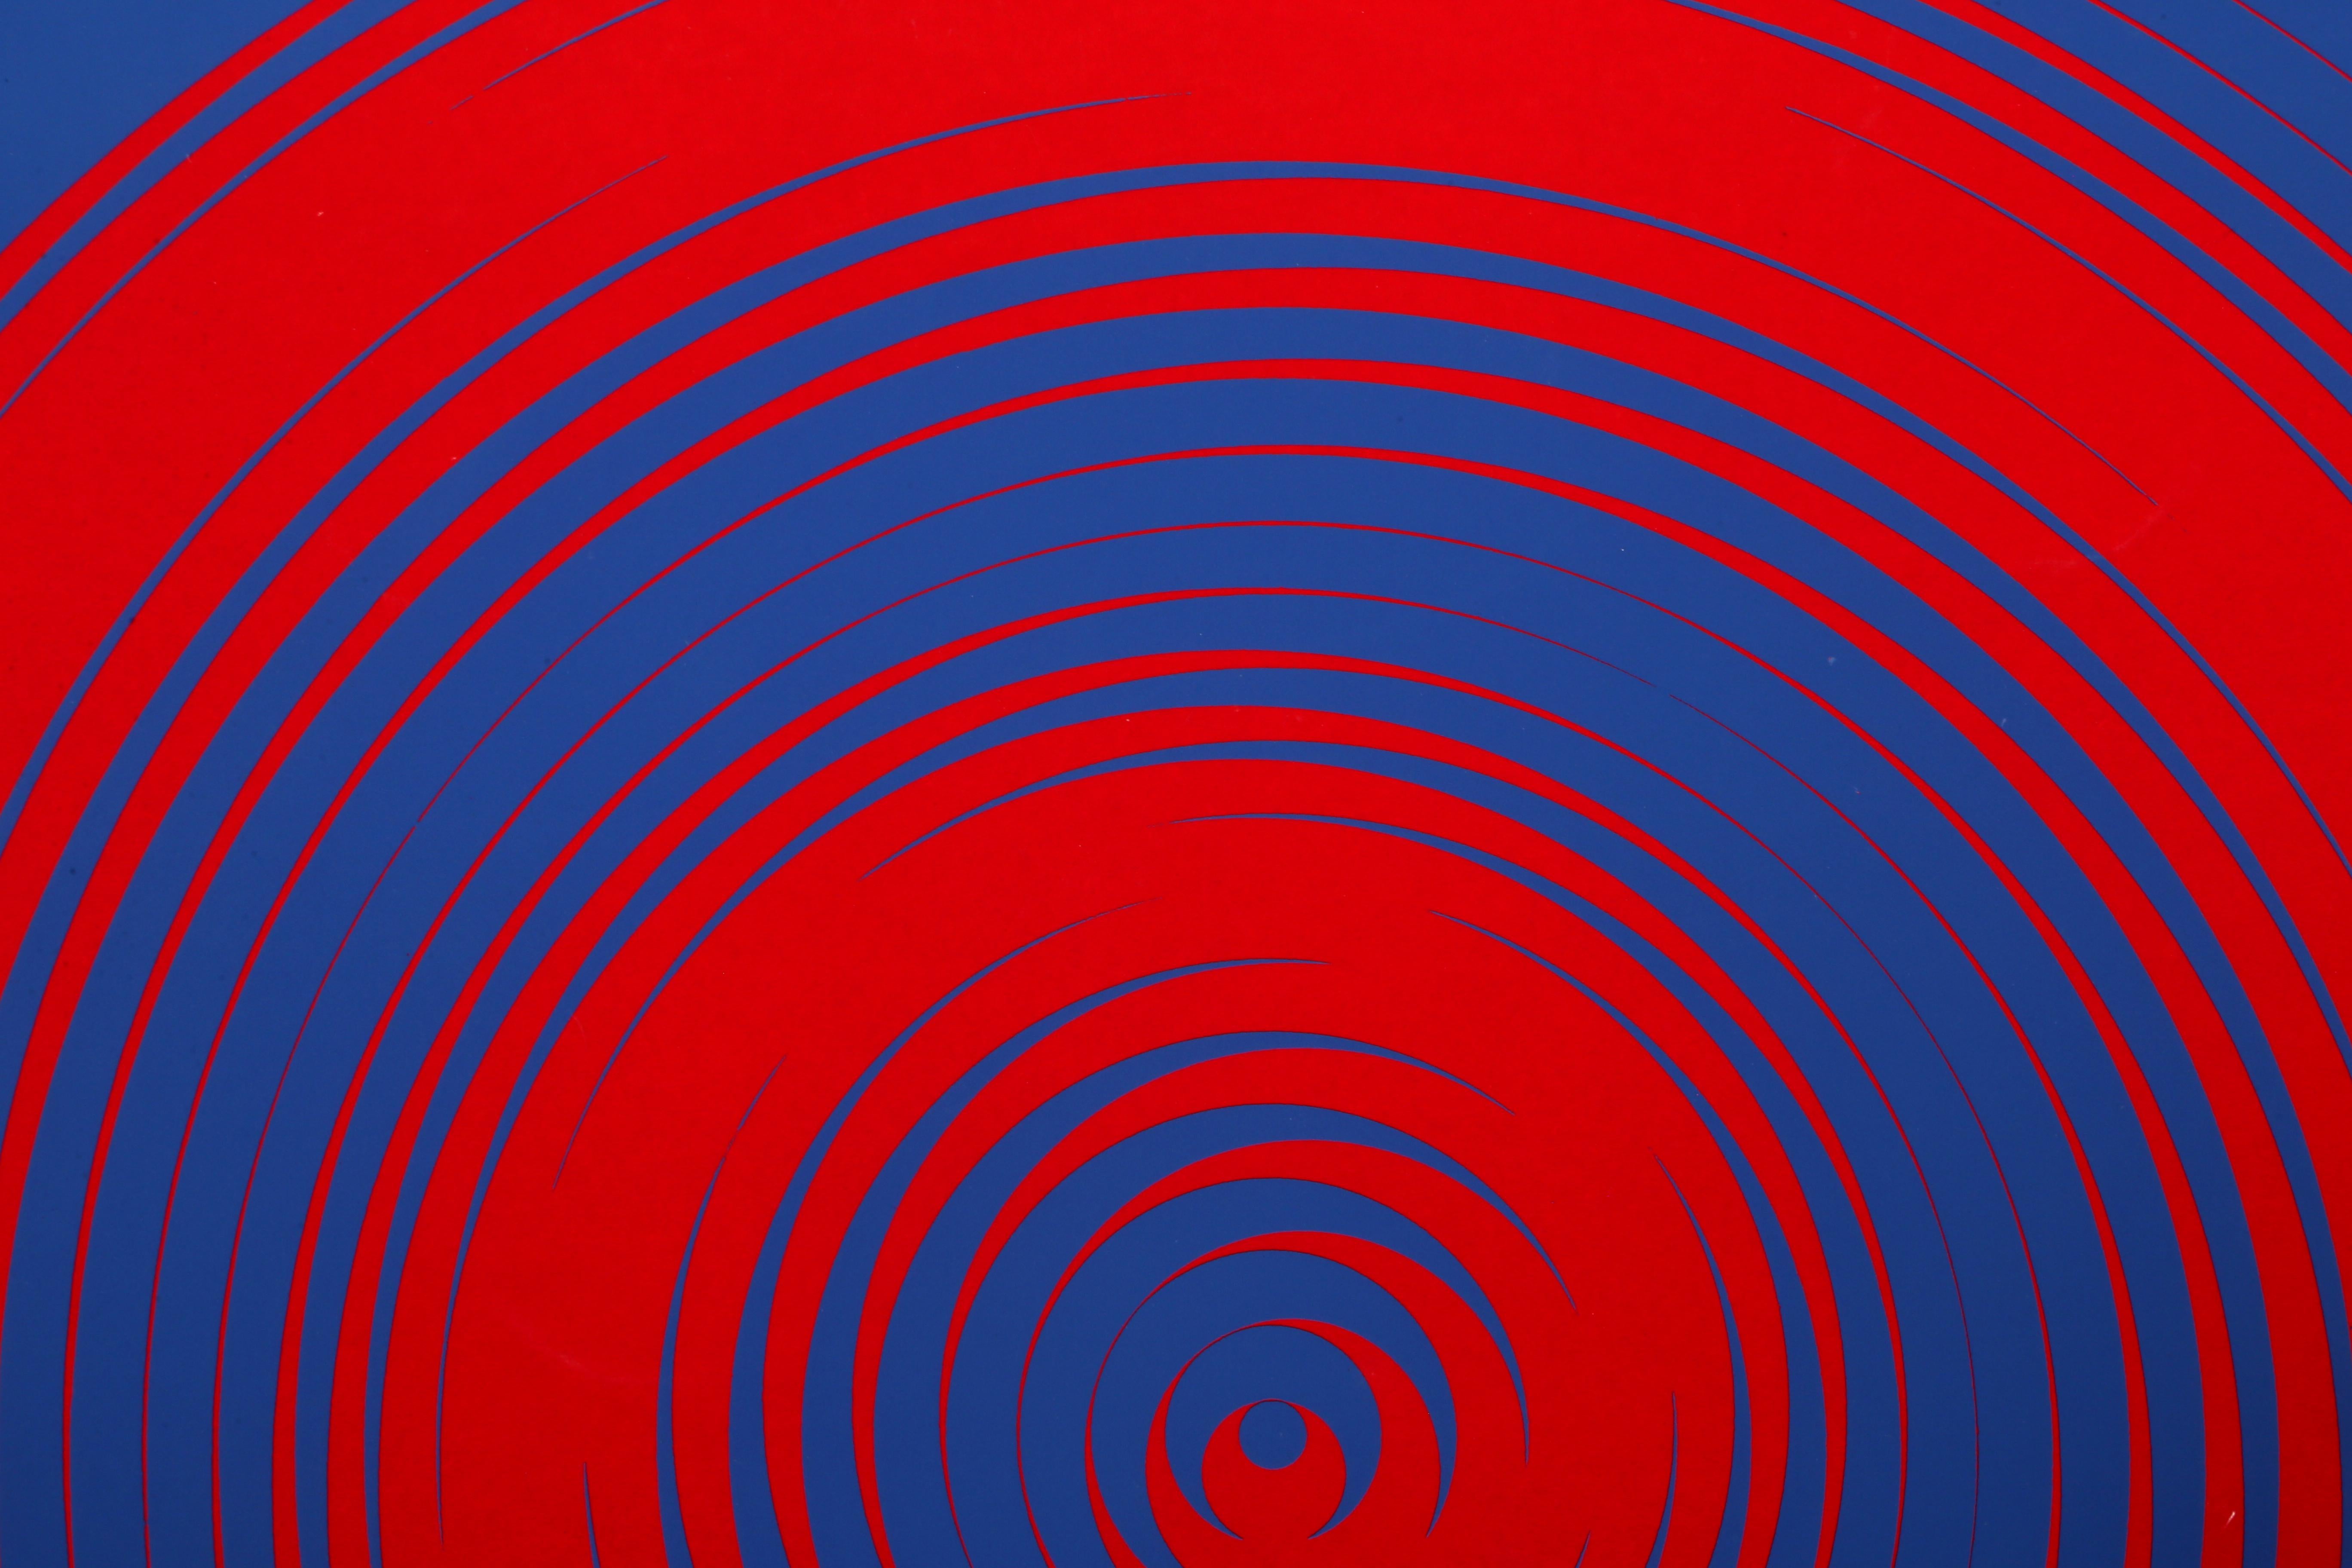 Blue and Red Spirals - Op Art Print by Getulio Alviani